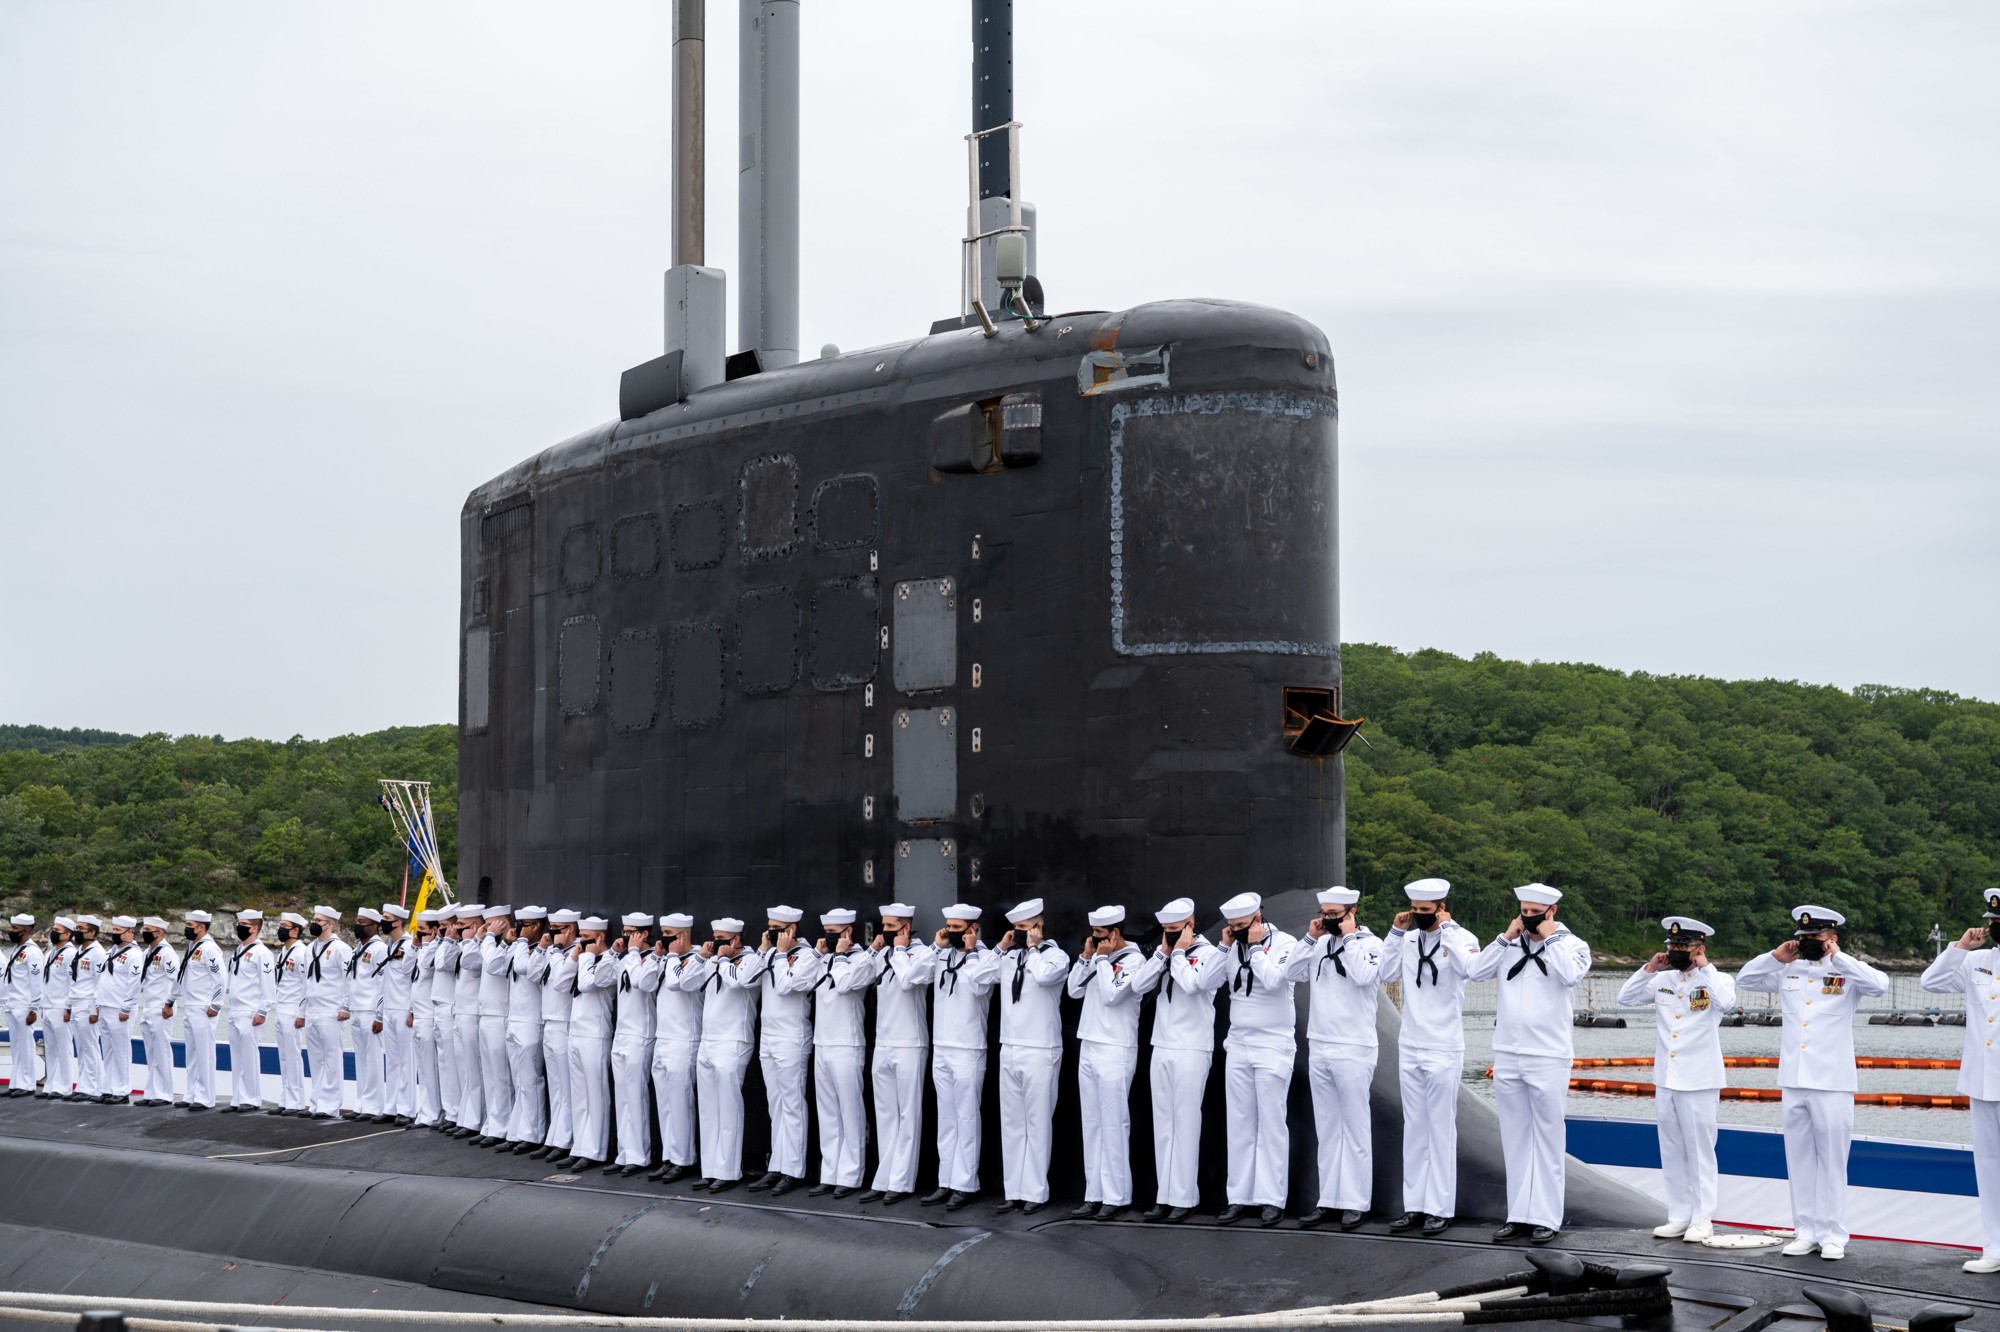 ssn-792 uss vermont virginia class attack submarine us navy 04 commissioning celebrations